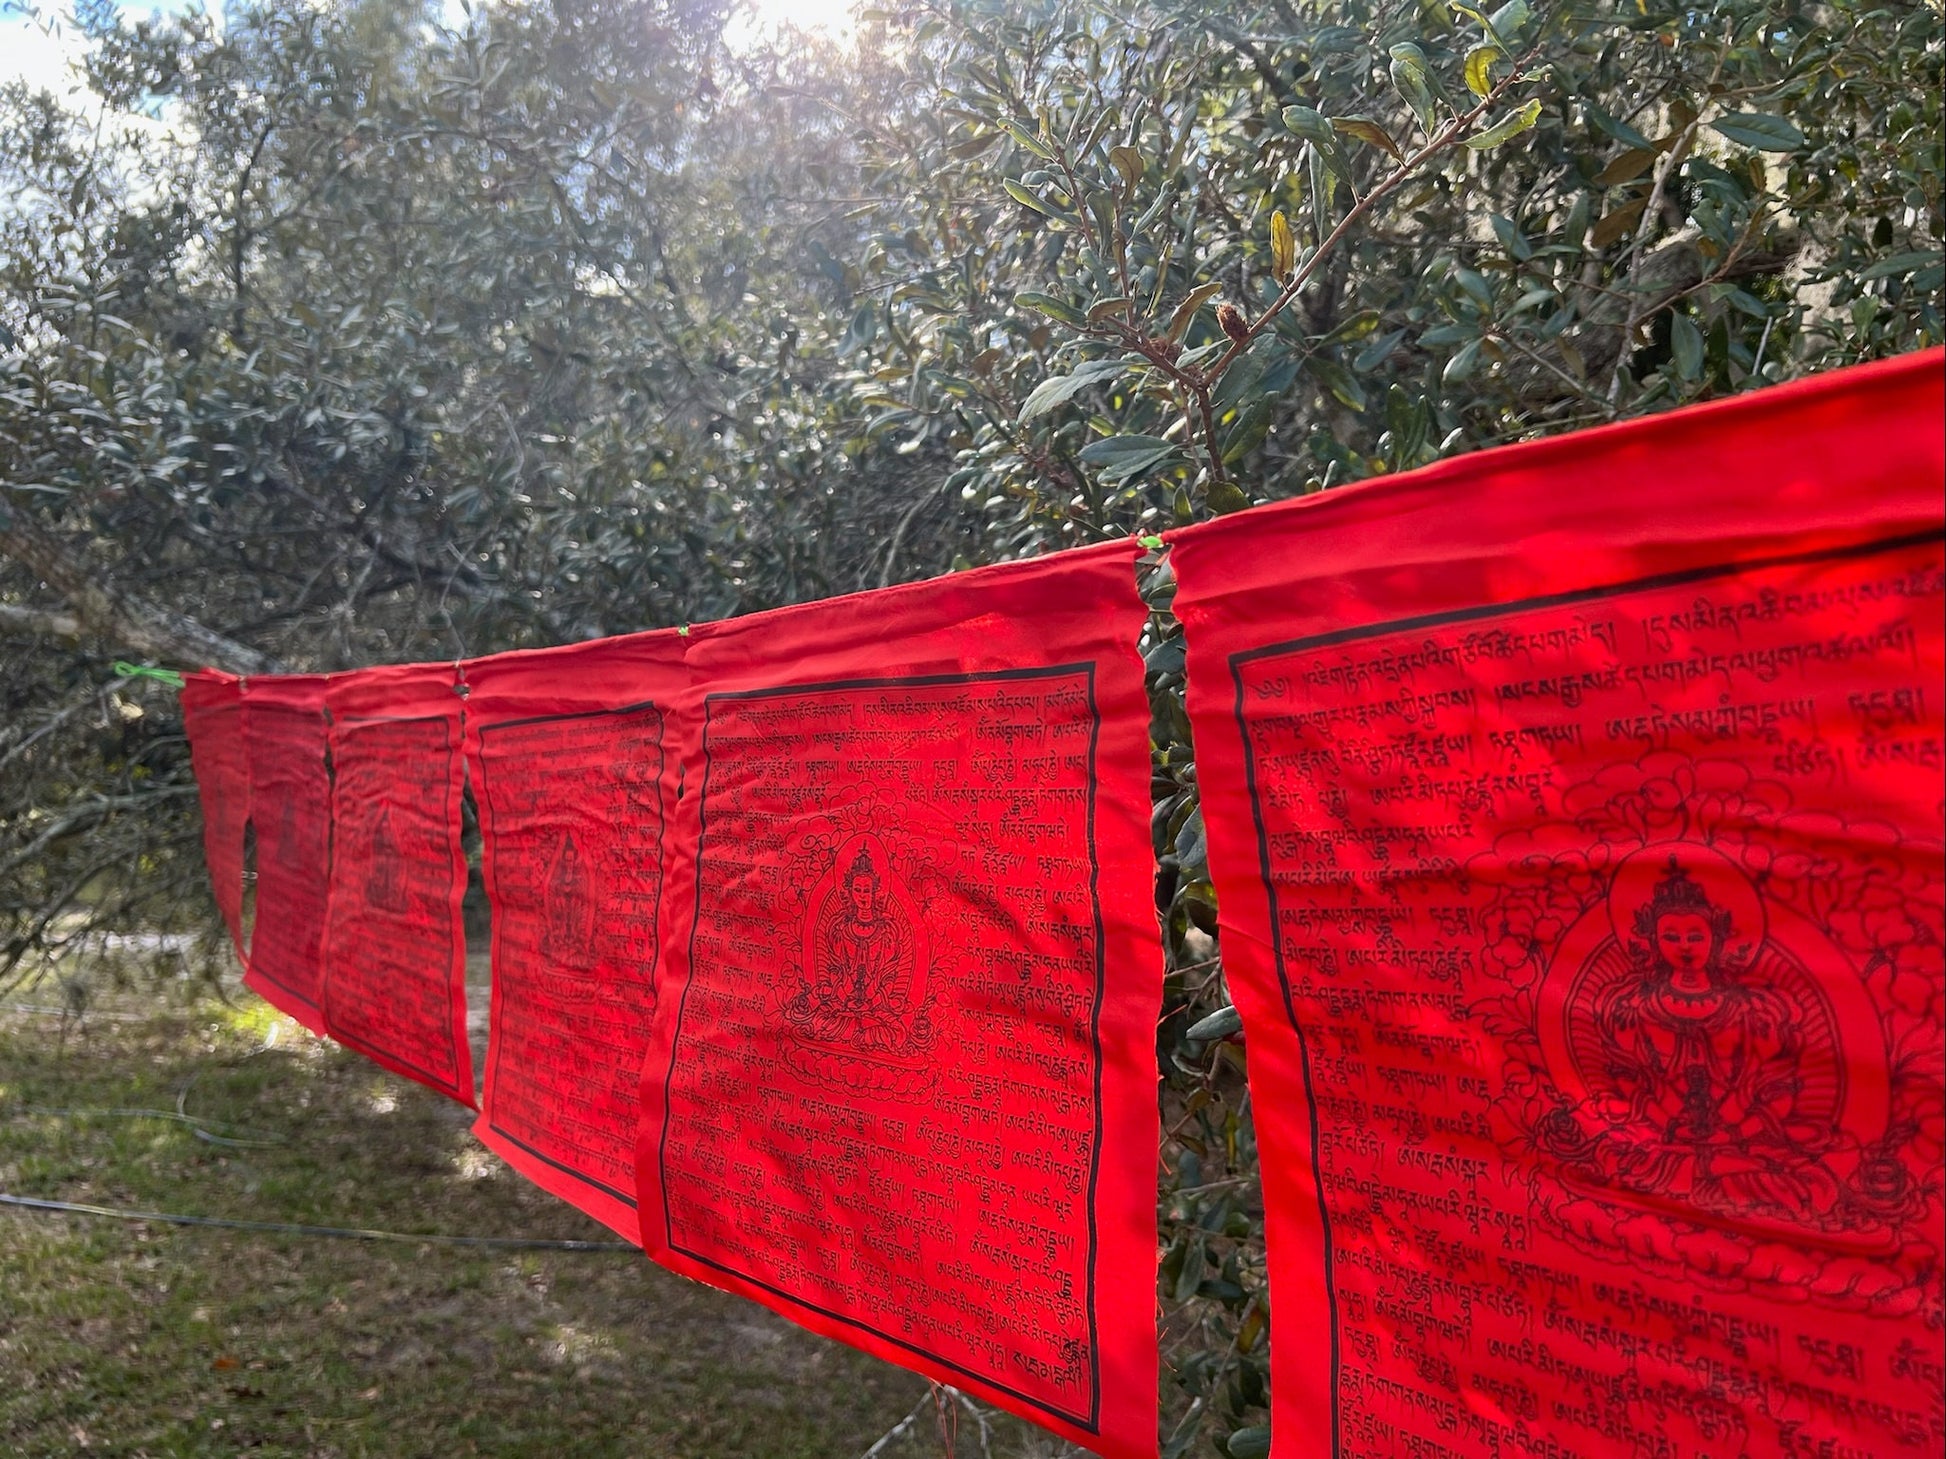 A segment of a 25 flag strand of vibrant all red Amitayus prayer flags hanging in the afternoon sun.